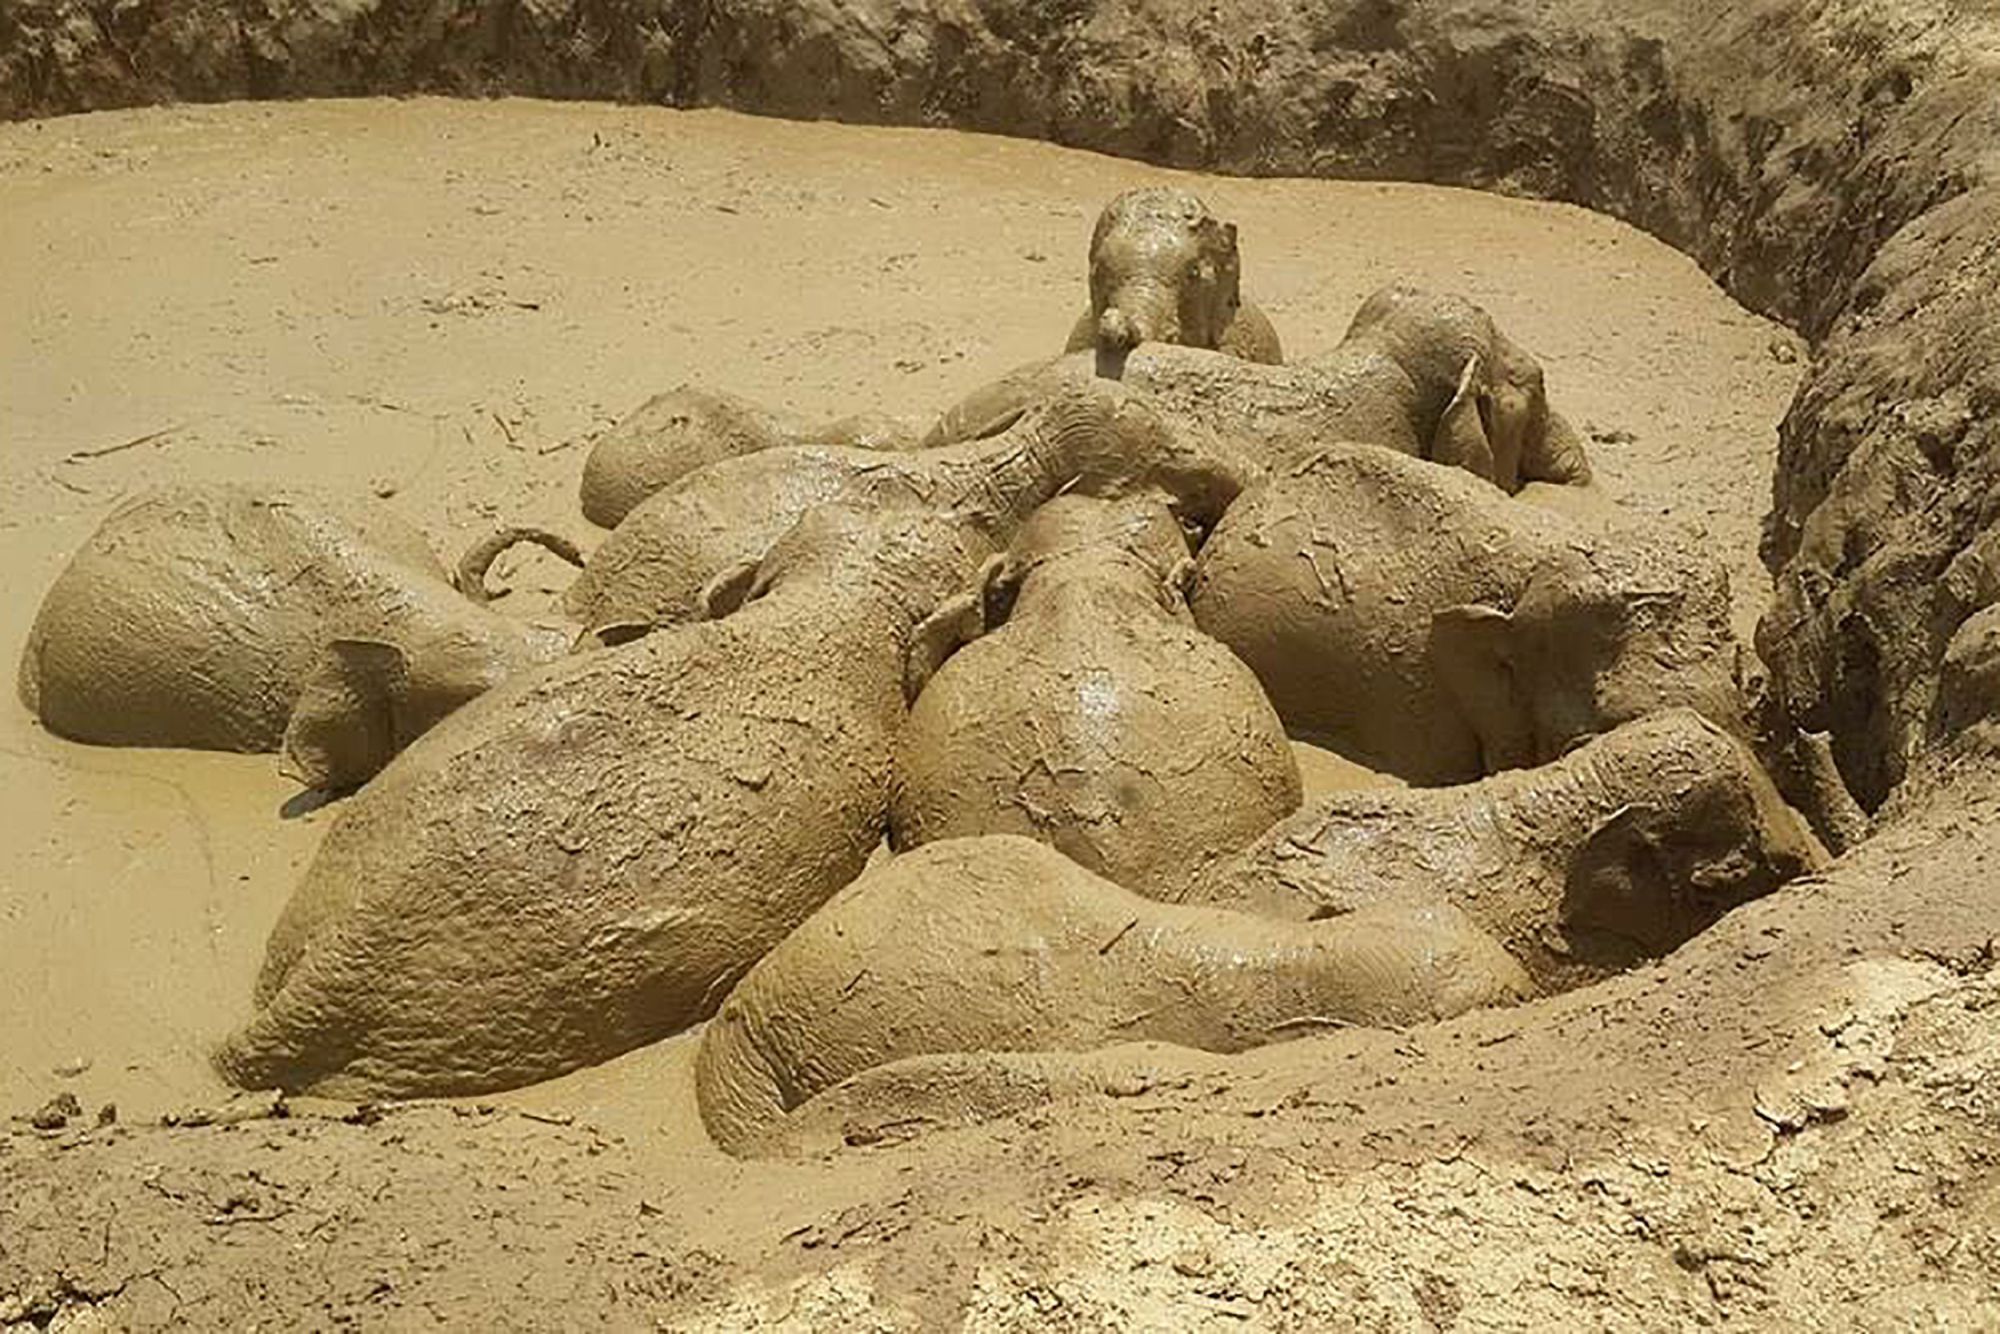 Image: Eleven Asian elephants saved from death in mud hole by grabbing ropes and cooperating with humans